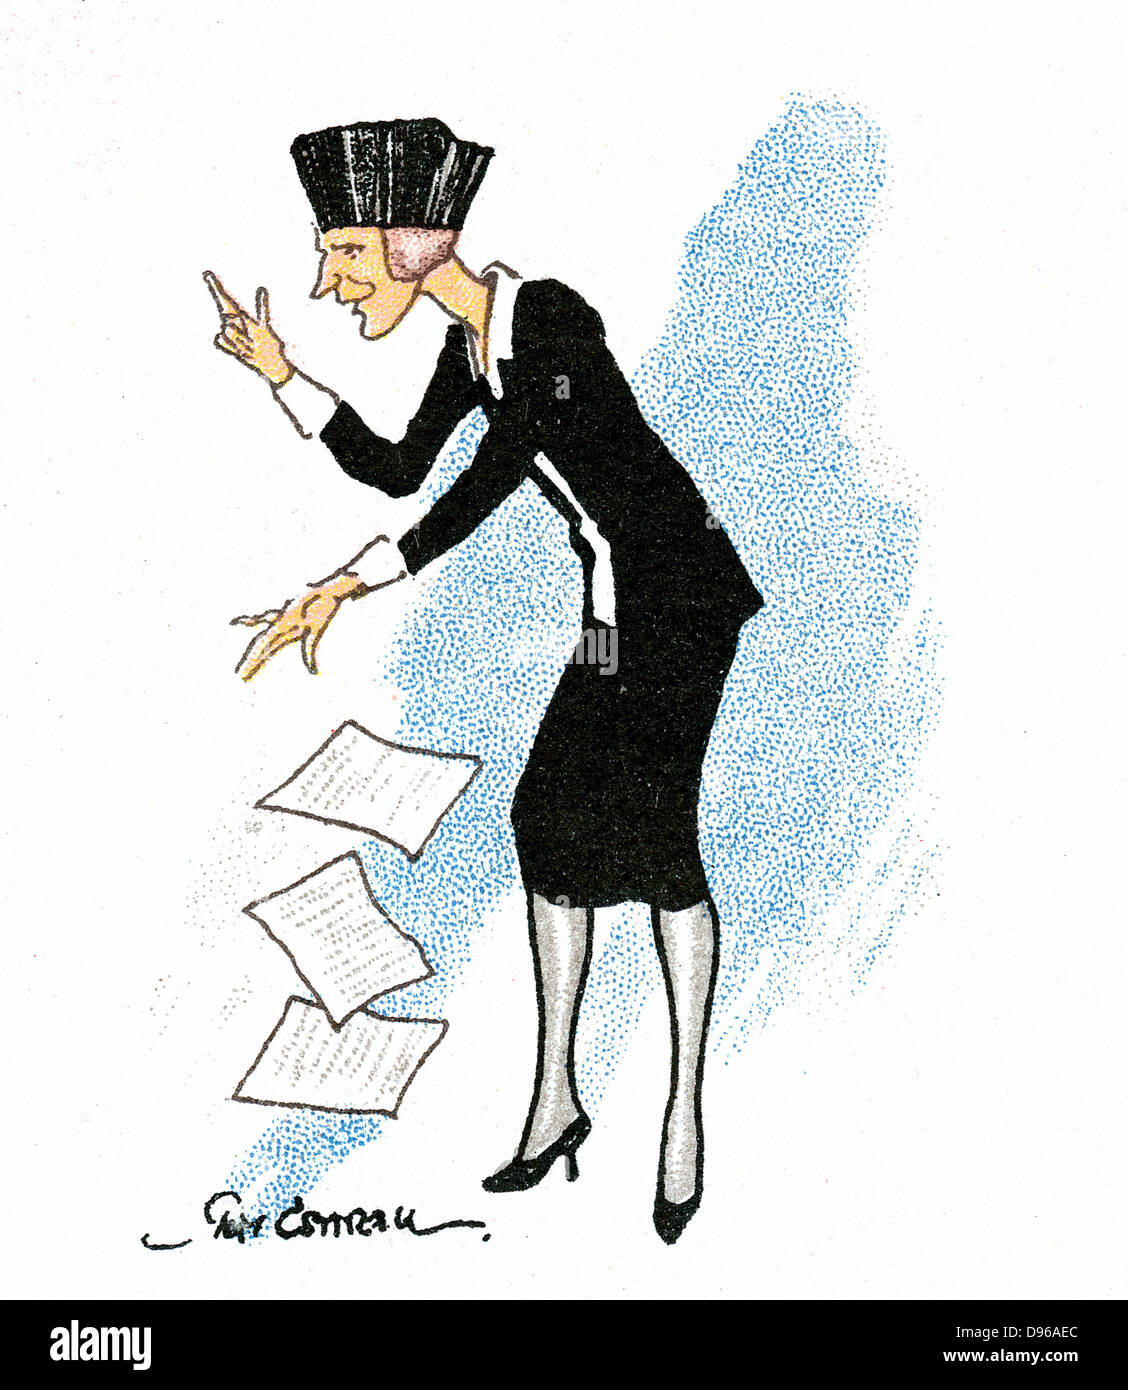 Nancy Witcher Langhorne Astor, Viscountess Astor (1879-1964) making a speech in Parliament. American-born British politician. Conservative Member of Parliament for Plymouth 1919. First woman to take her seat in House of Commons. Cartoon. Card published London, 1929. Stock Photo